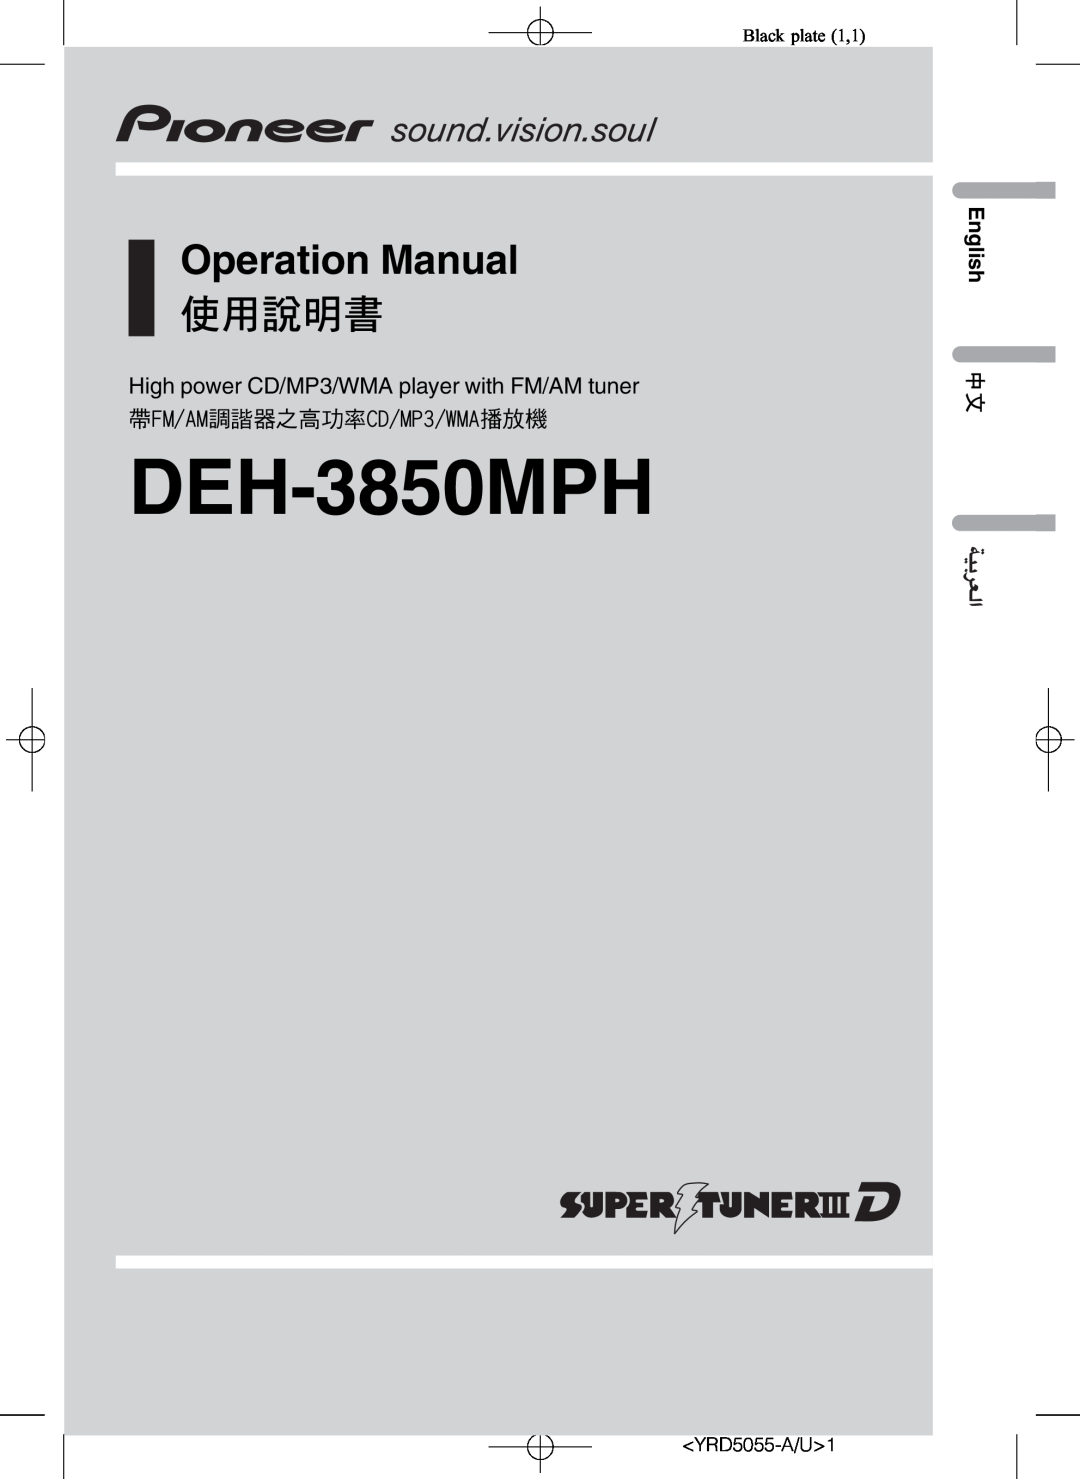 Pioneer DEH-3850MPH operation manual 